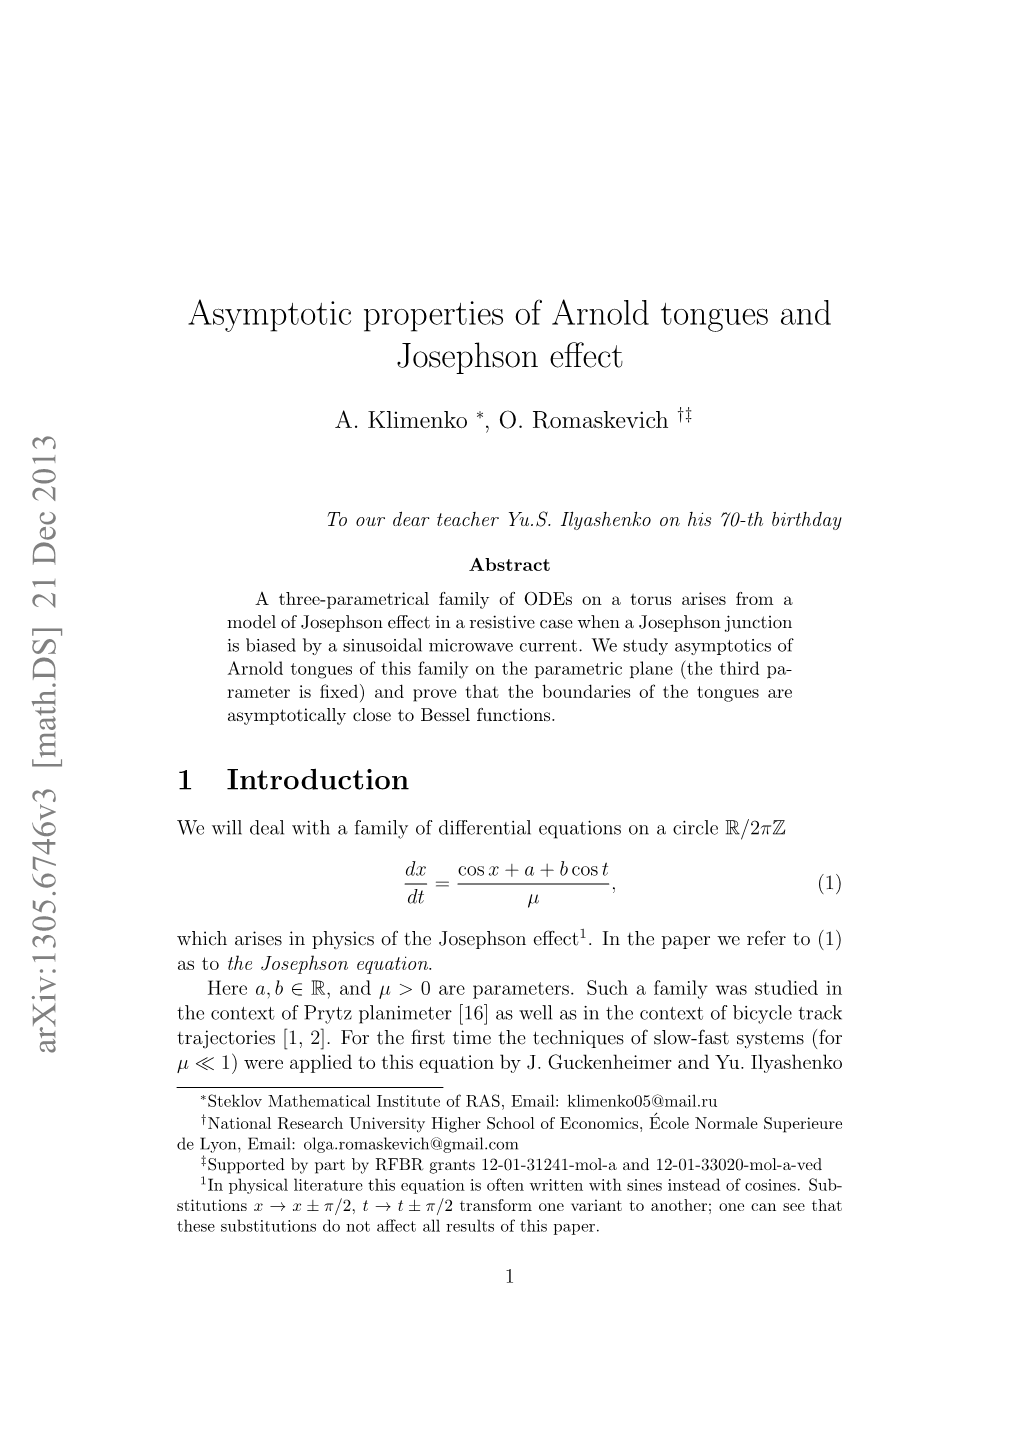 Asymptotic Properties of Arnold Tongues and Josephson Effect Arxiv